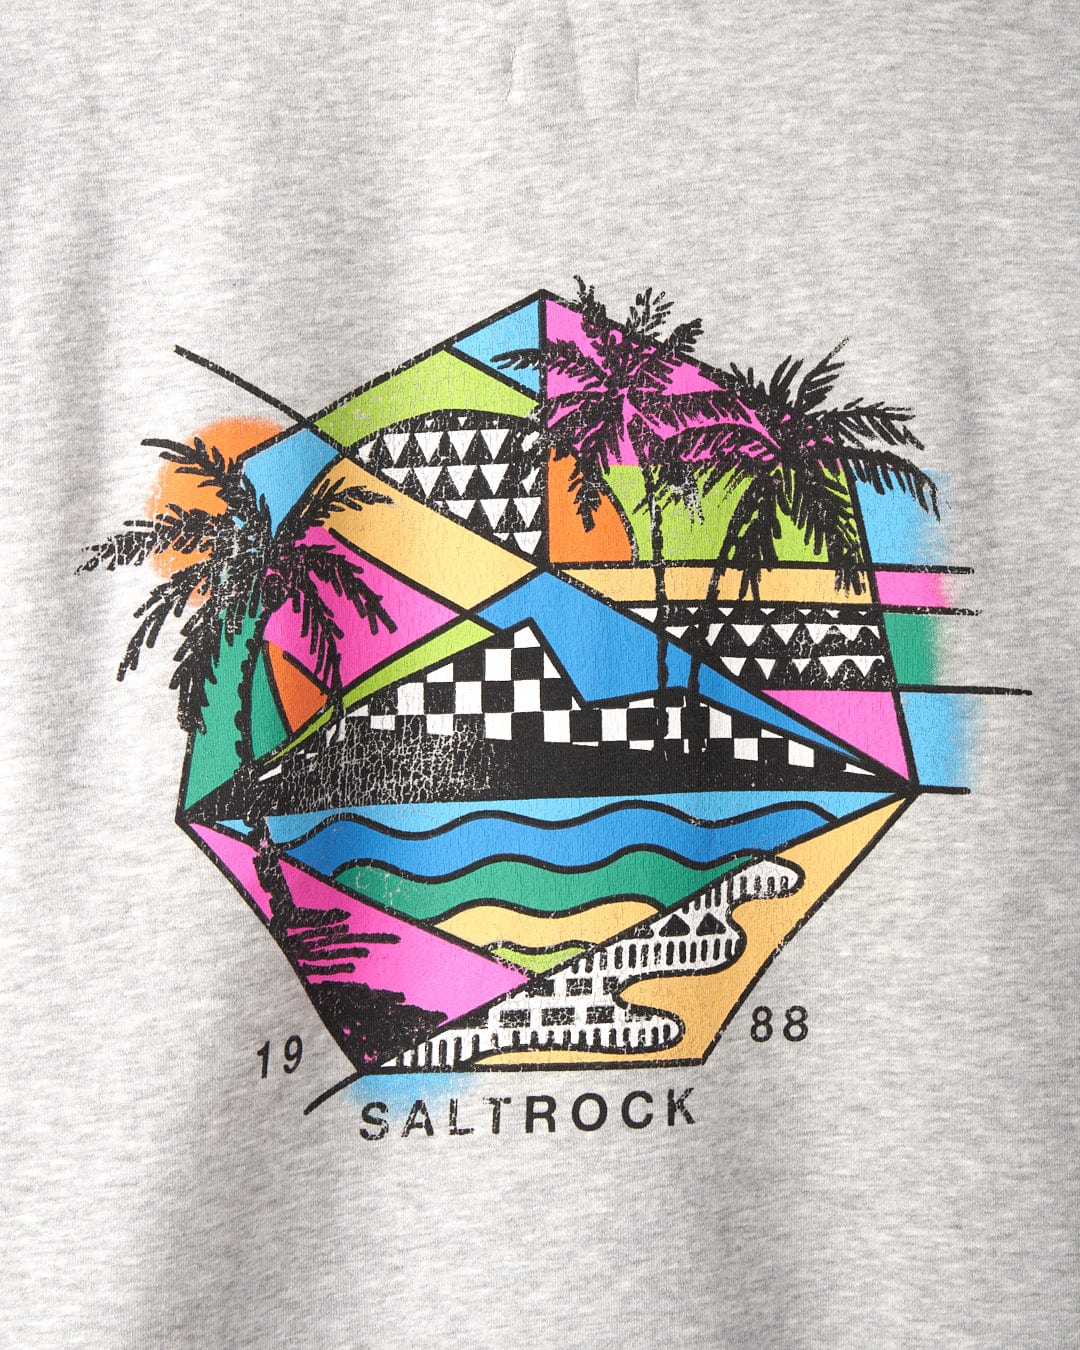 A colorful geometric design on a gray fabric features palm trees, waves, and patterned shapes with "Saltrock" and "1988" written below. The stylish Geo Palms - Mens Recycled Zip Hoodie - Grey also showcases distinct Palm graphics while highlighting Saltrock branding.